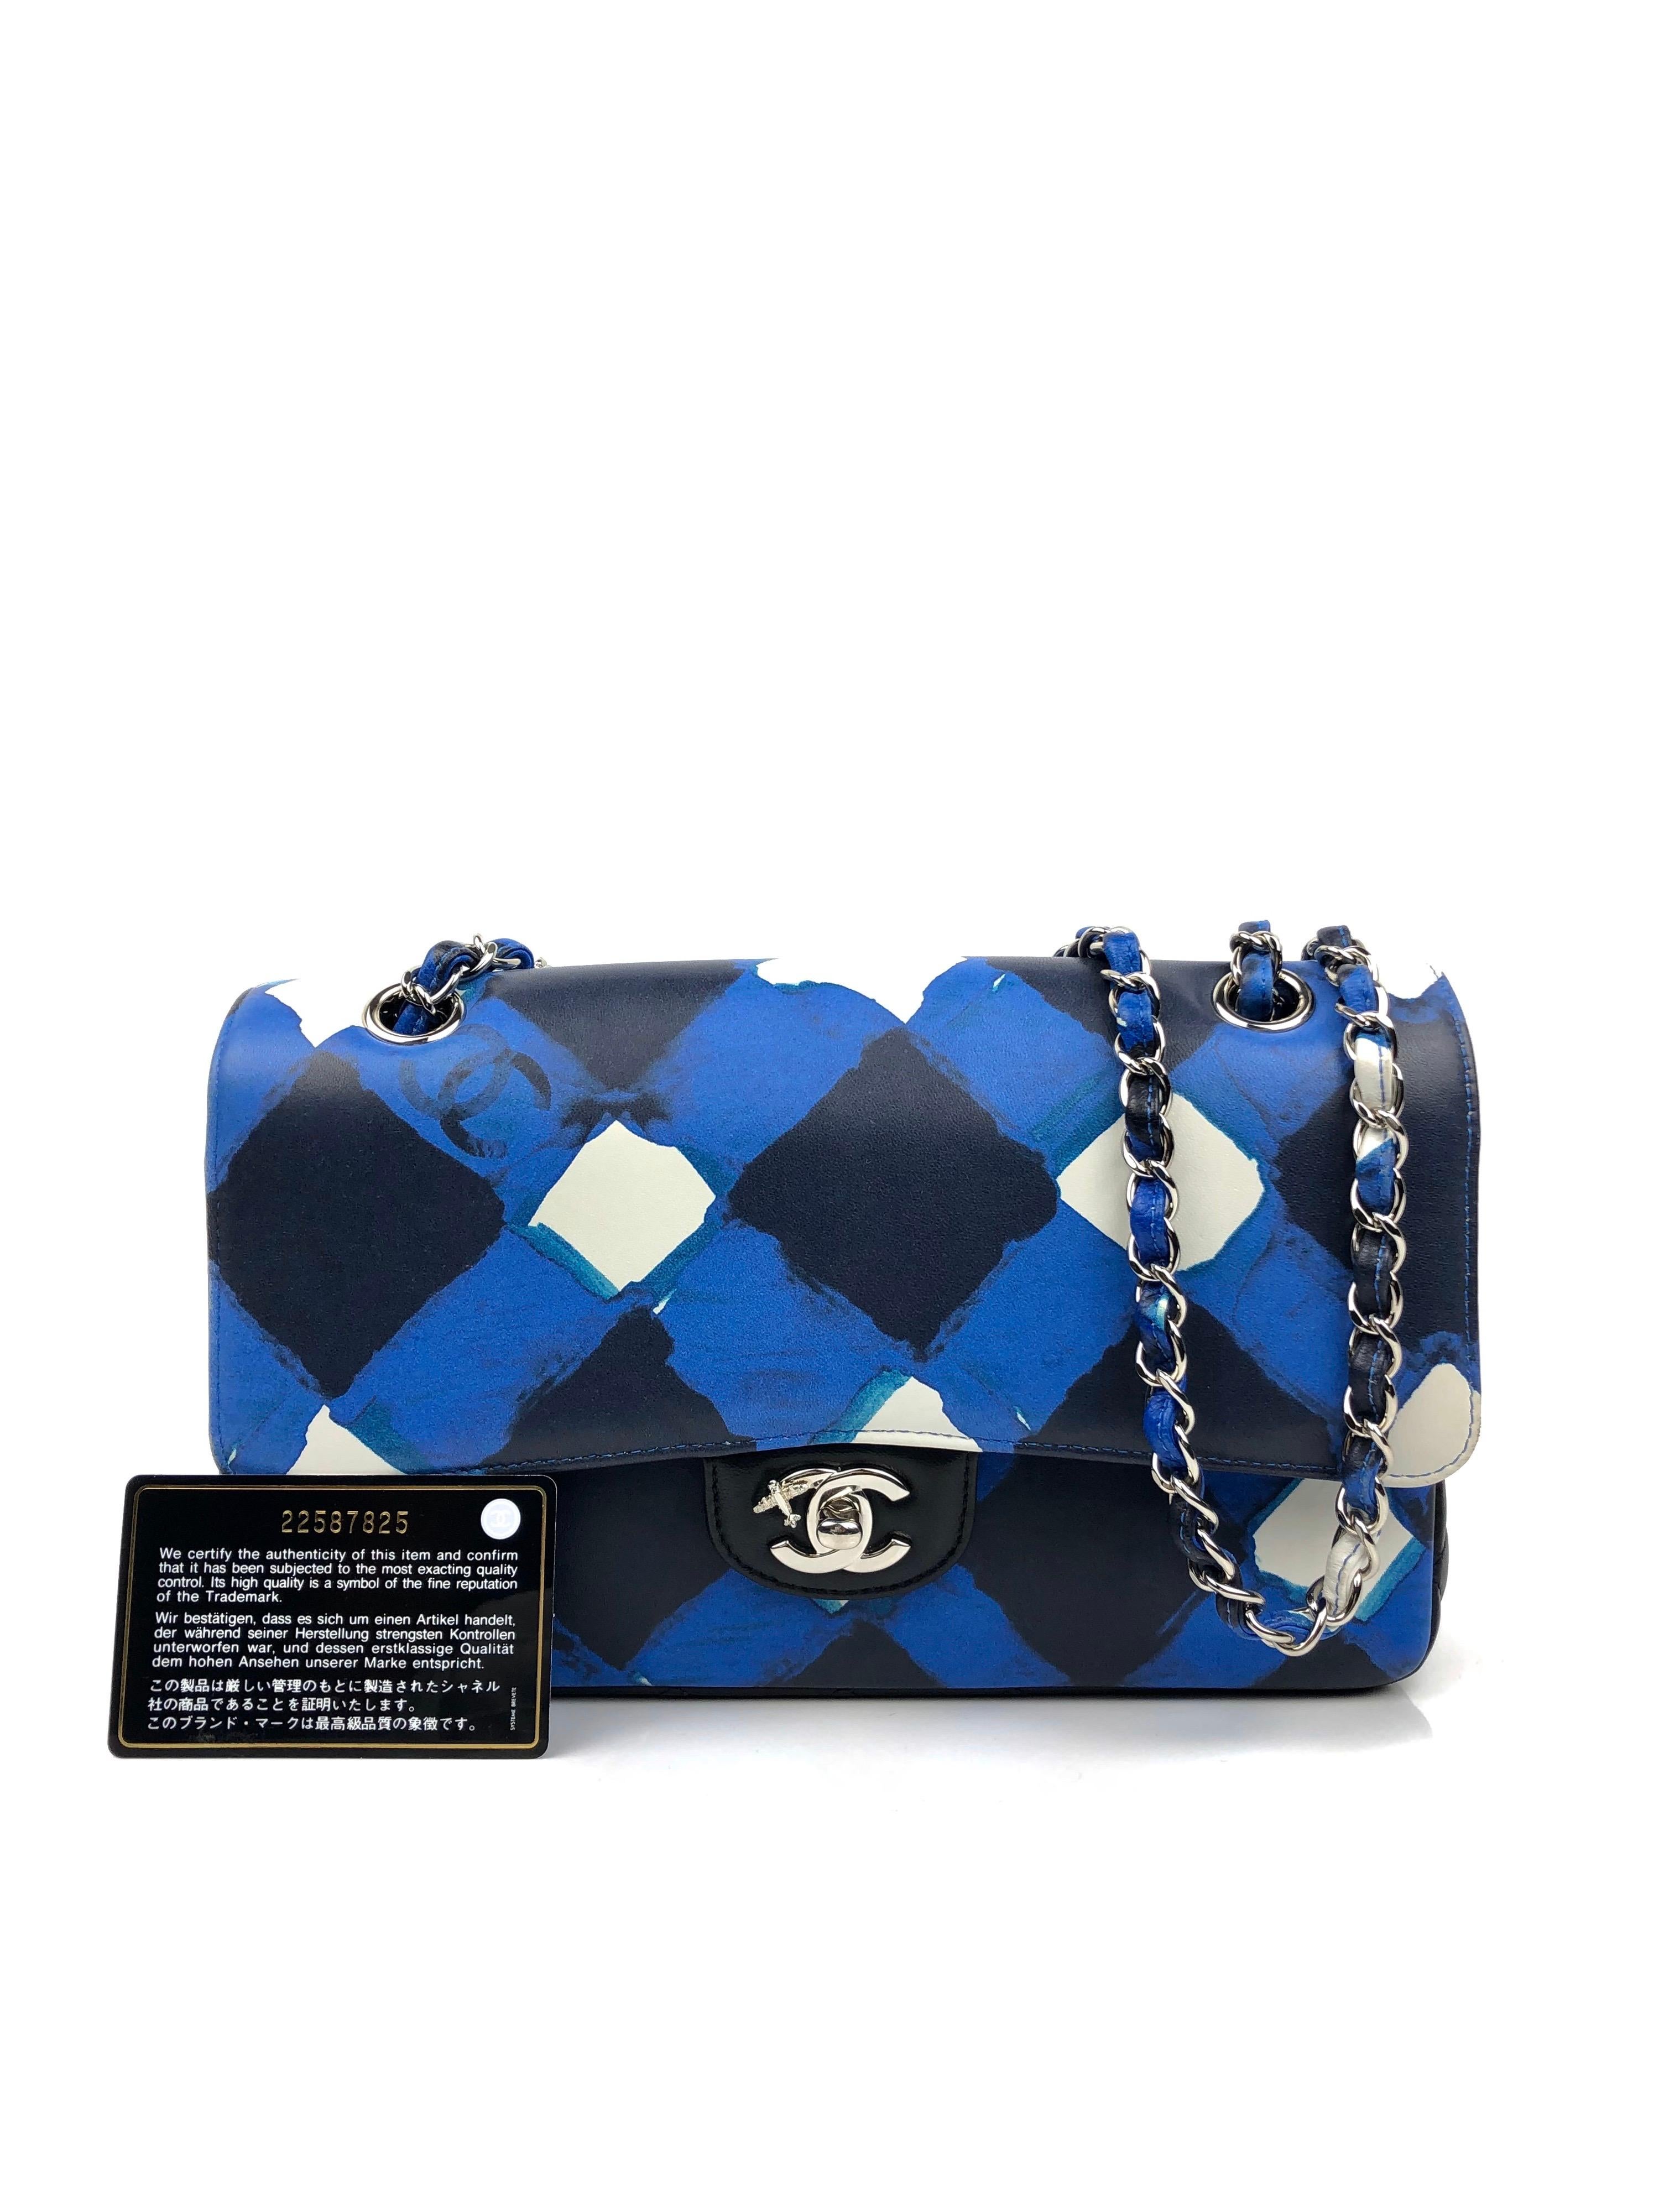 LIKE NEW RARE Chanel Airline Airplane Classic Medium Double Flap Blue Black White. 

Shop with Confidence from Lux Addicts. Authenticity Guaranteed! 